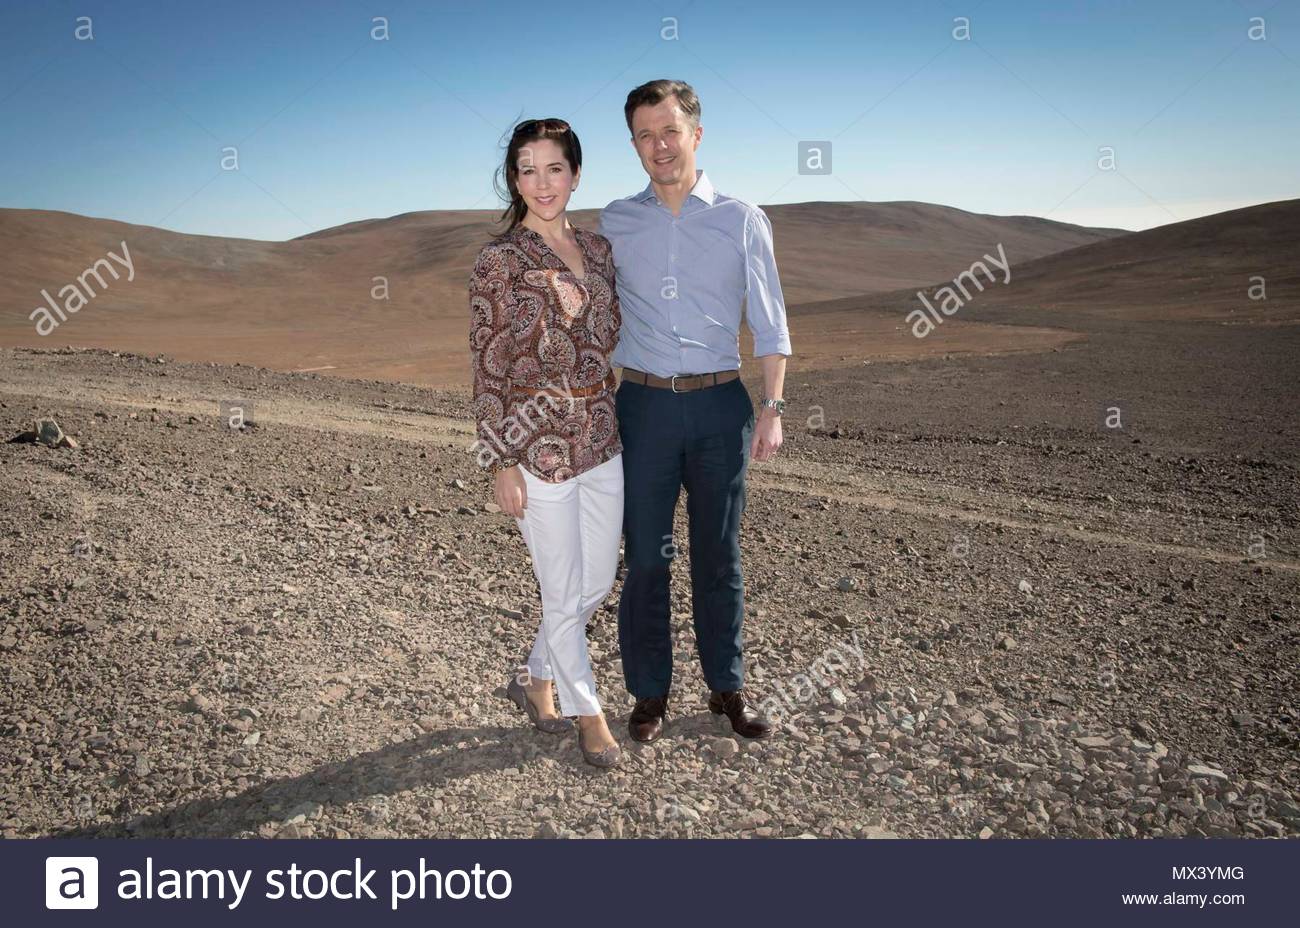 crown-prince-frederik-and-crown-princess-mary-crown-prince-couple-on-an-official-visit-to-chile-crown-prince-frederik-and-crown-princess-mary-at-the-eso-european-southern-observatory-in-paranal-antofagasto-chile-code-03799mh-photo-martin-hoeienall-over-press-denmark-MX3YMG.jpg